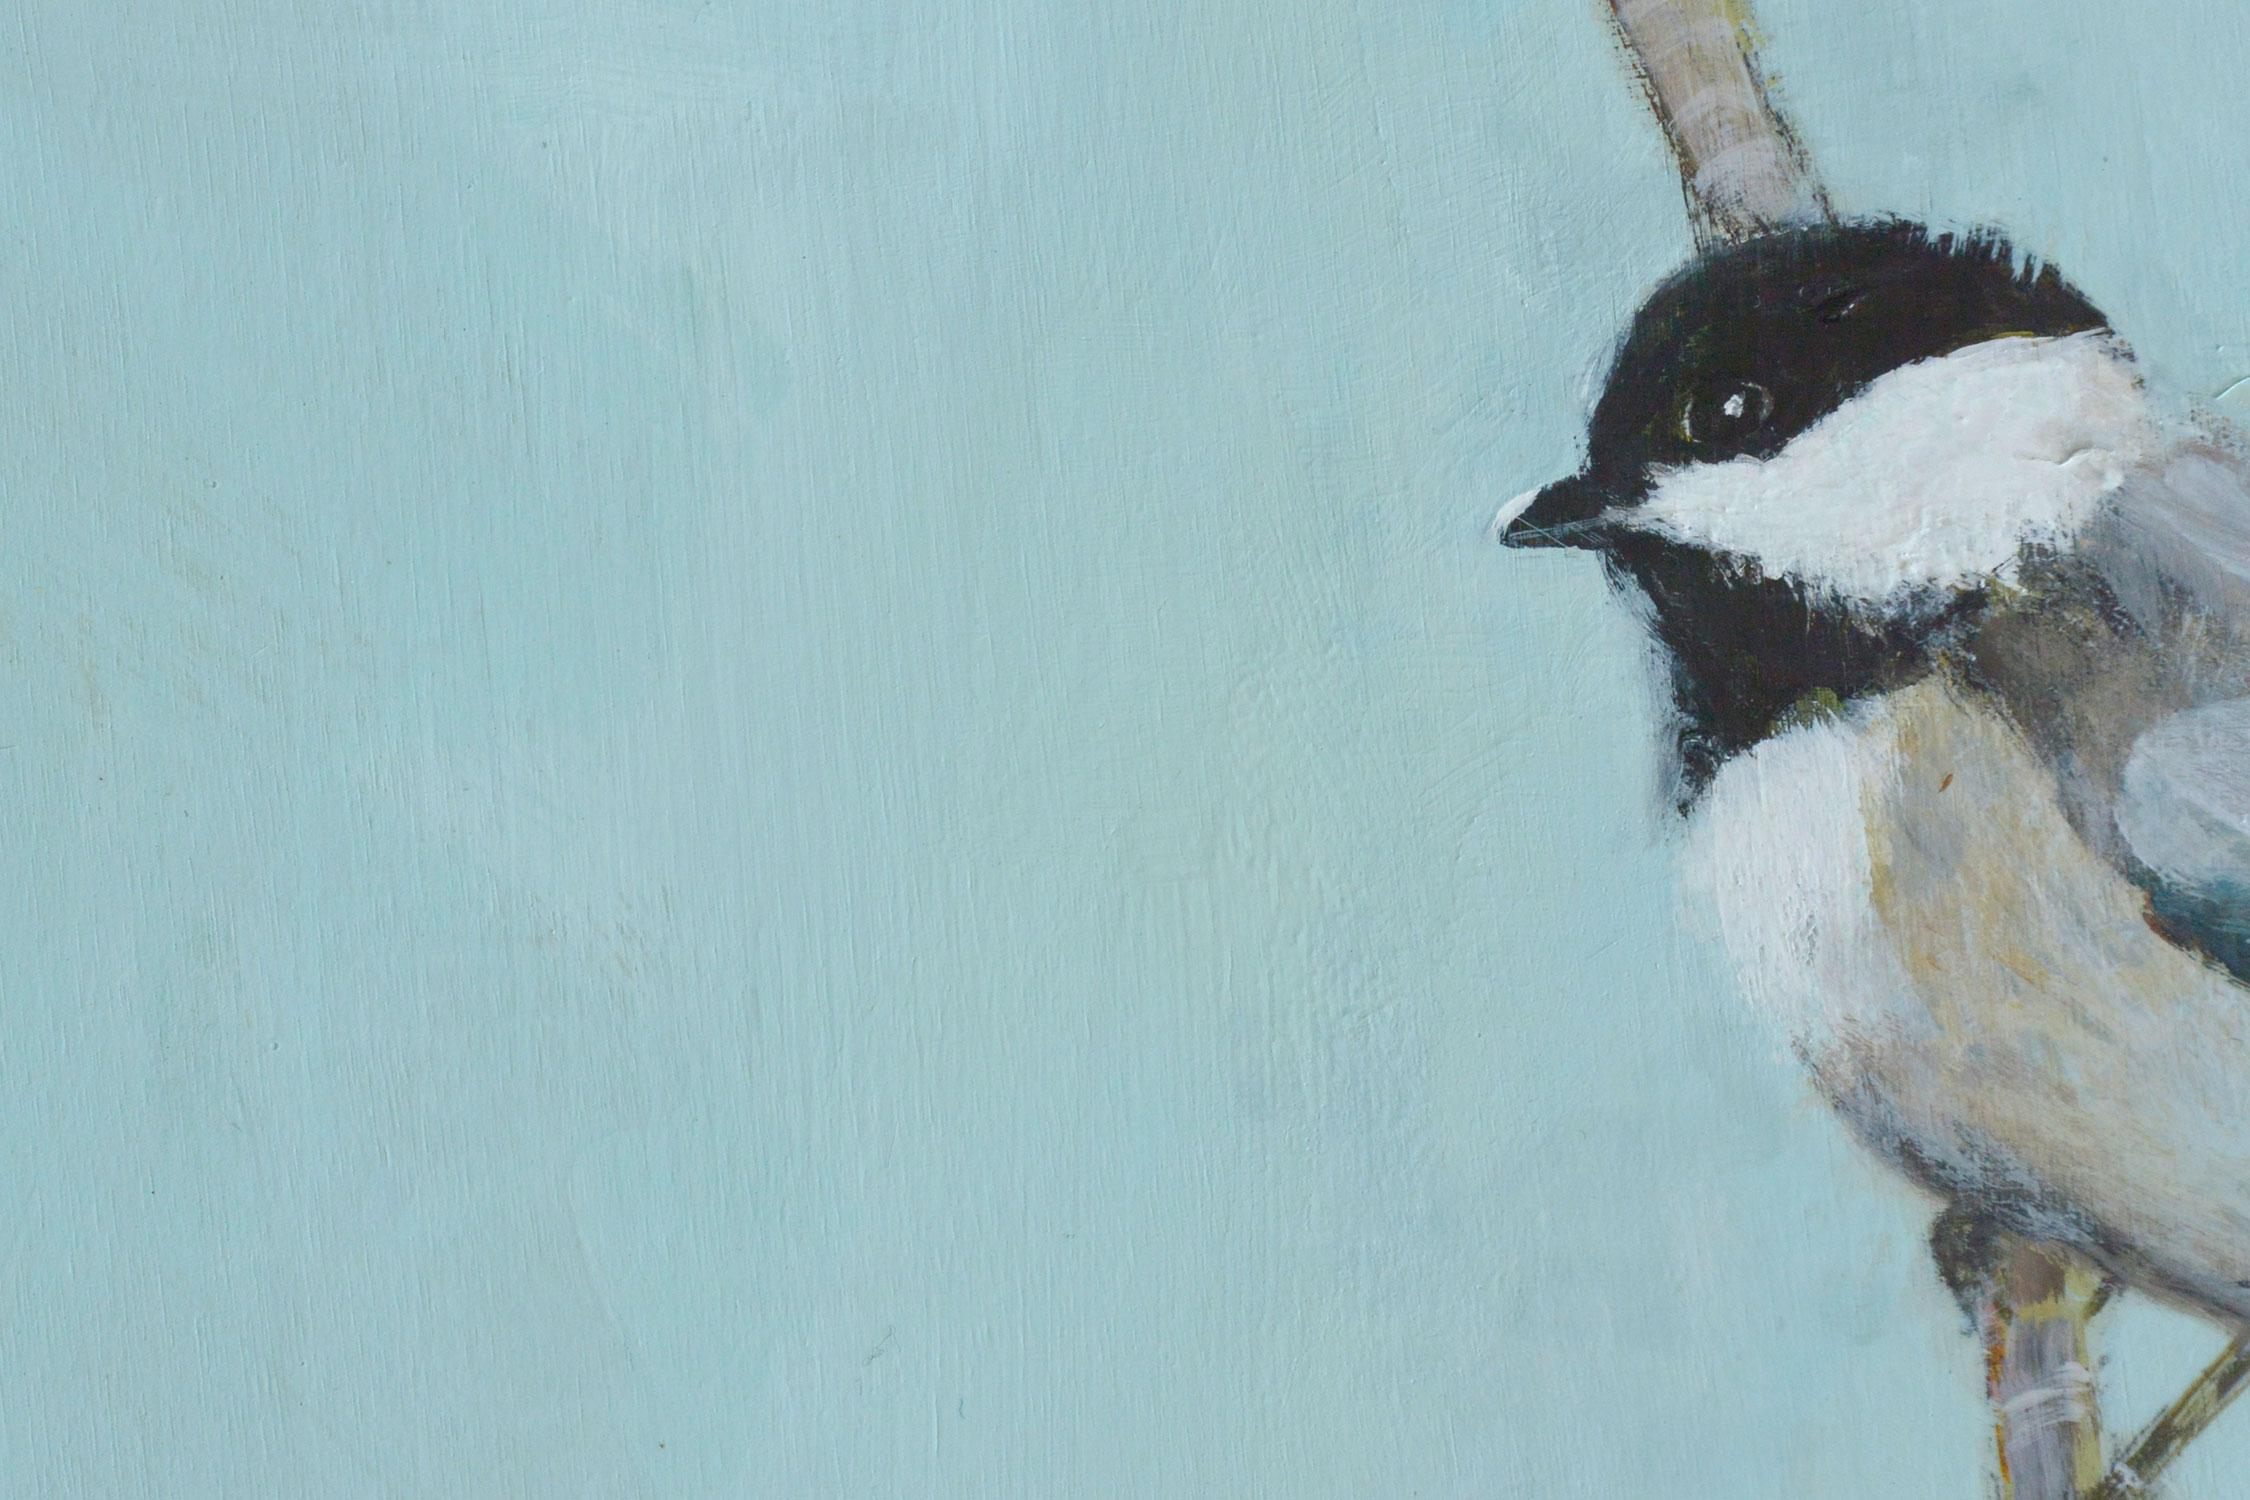 <p>Artist Comments<br />Part of a series of small scale works illustrating the birds near Sally's home. She spotted this chickadee posing on a branch and focused on its delicate features highlighted against the turquoise sky.</p><br /><p>About the